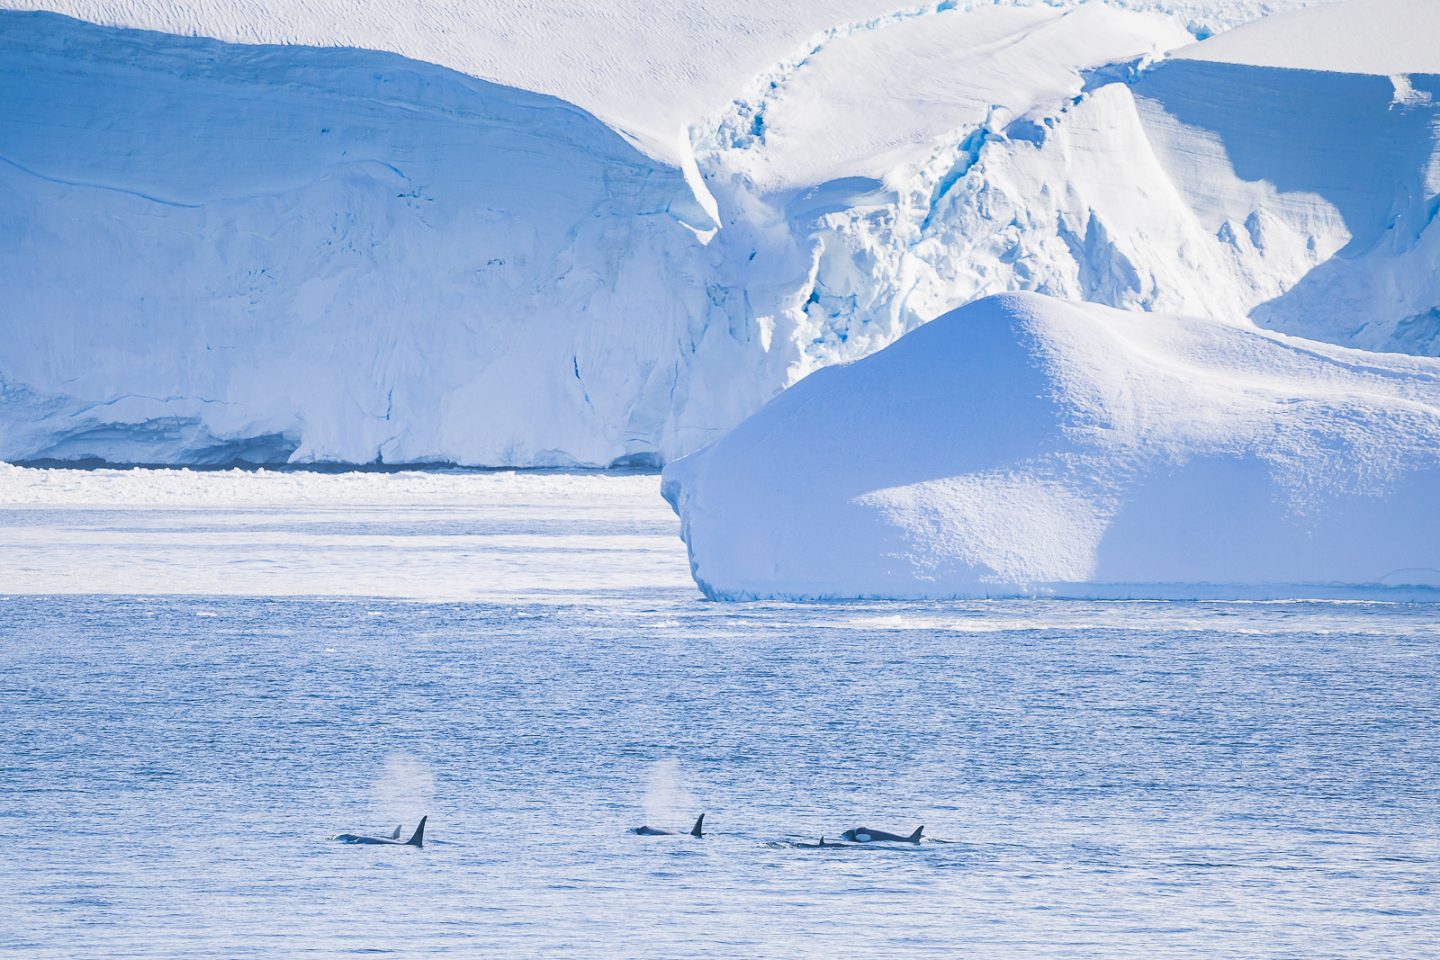 Orcas at the entrance of Lemaire channel, Antarctica